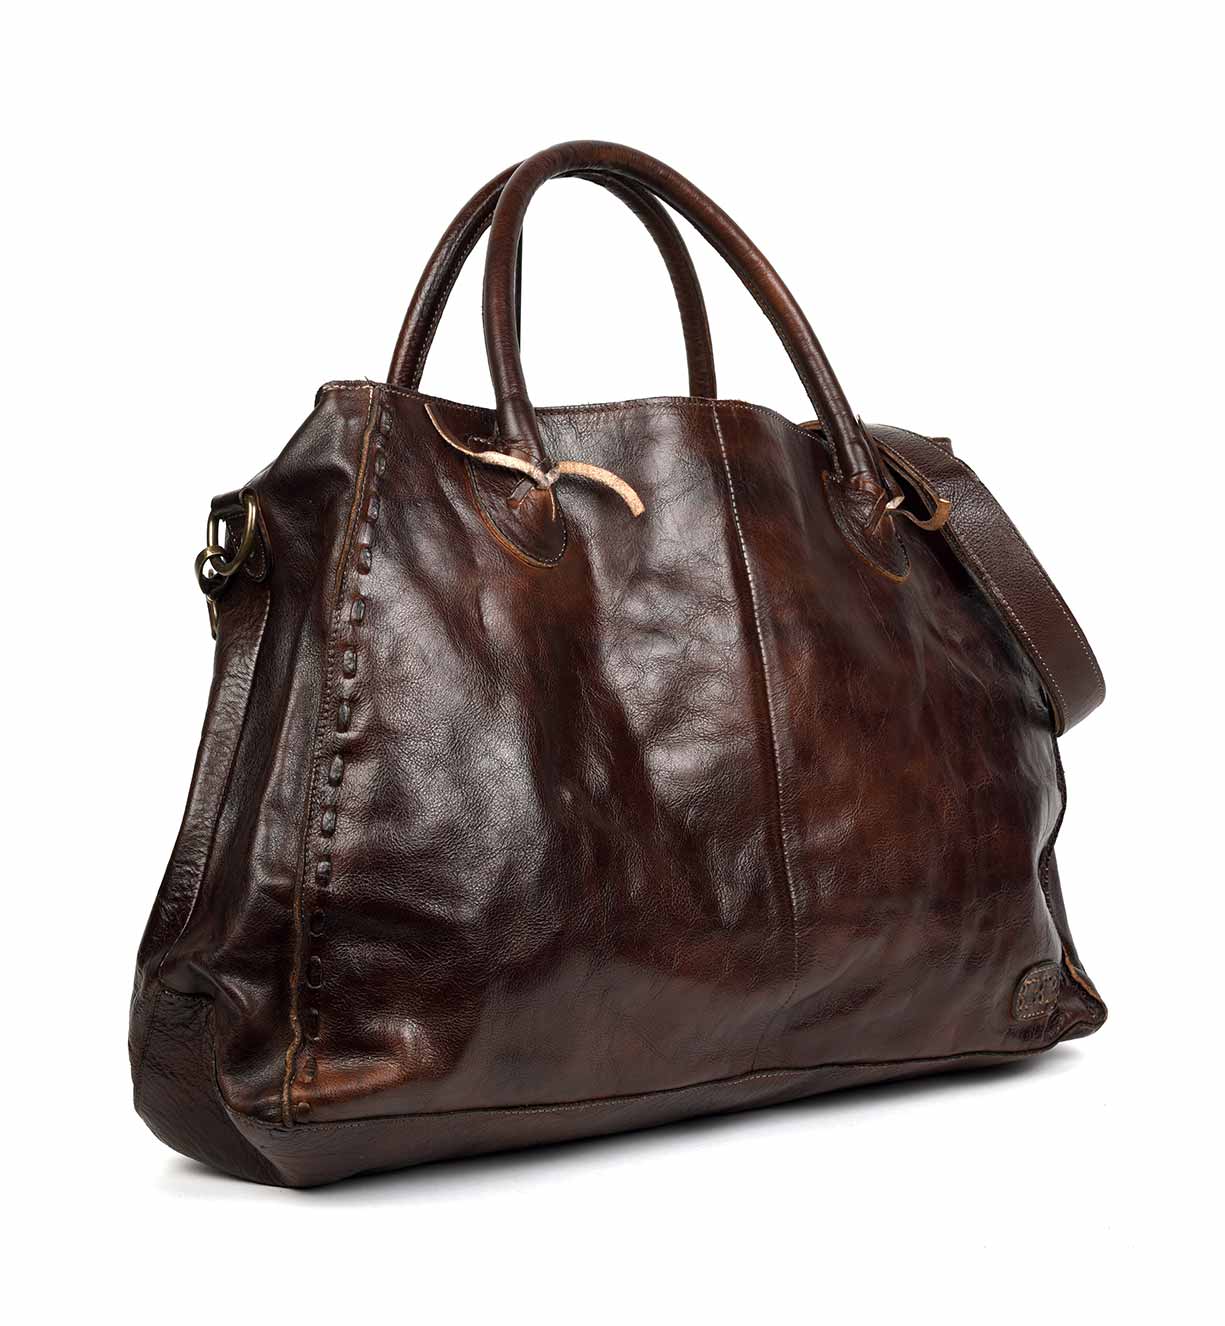 A Bed Stu Rockaway brown leather tote bag on a white background.